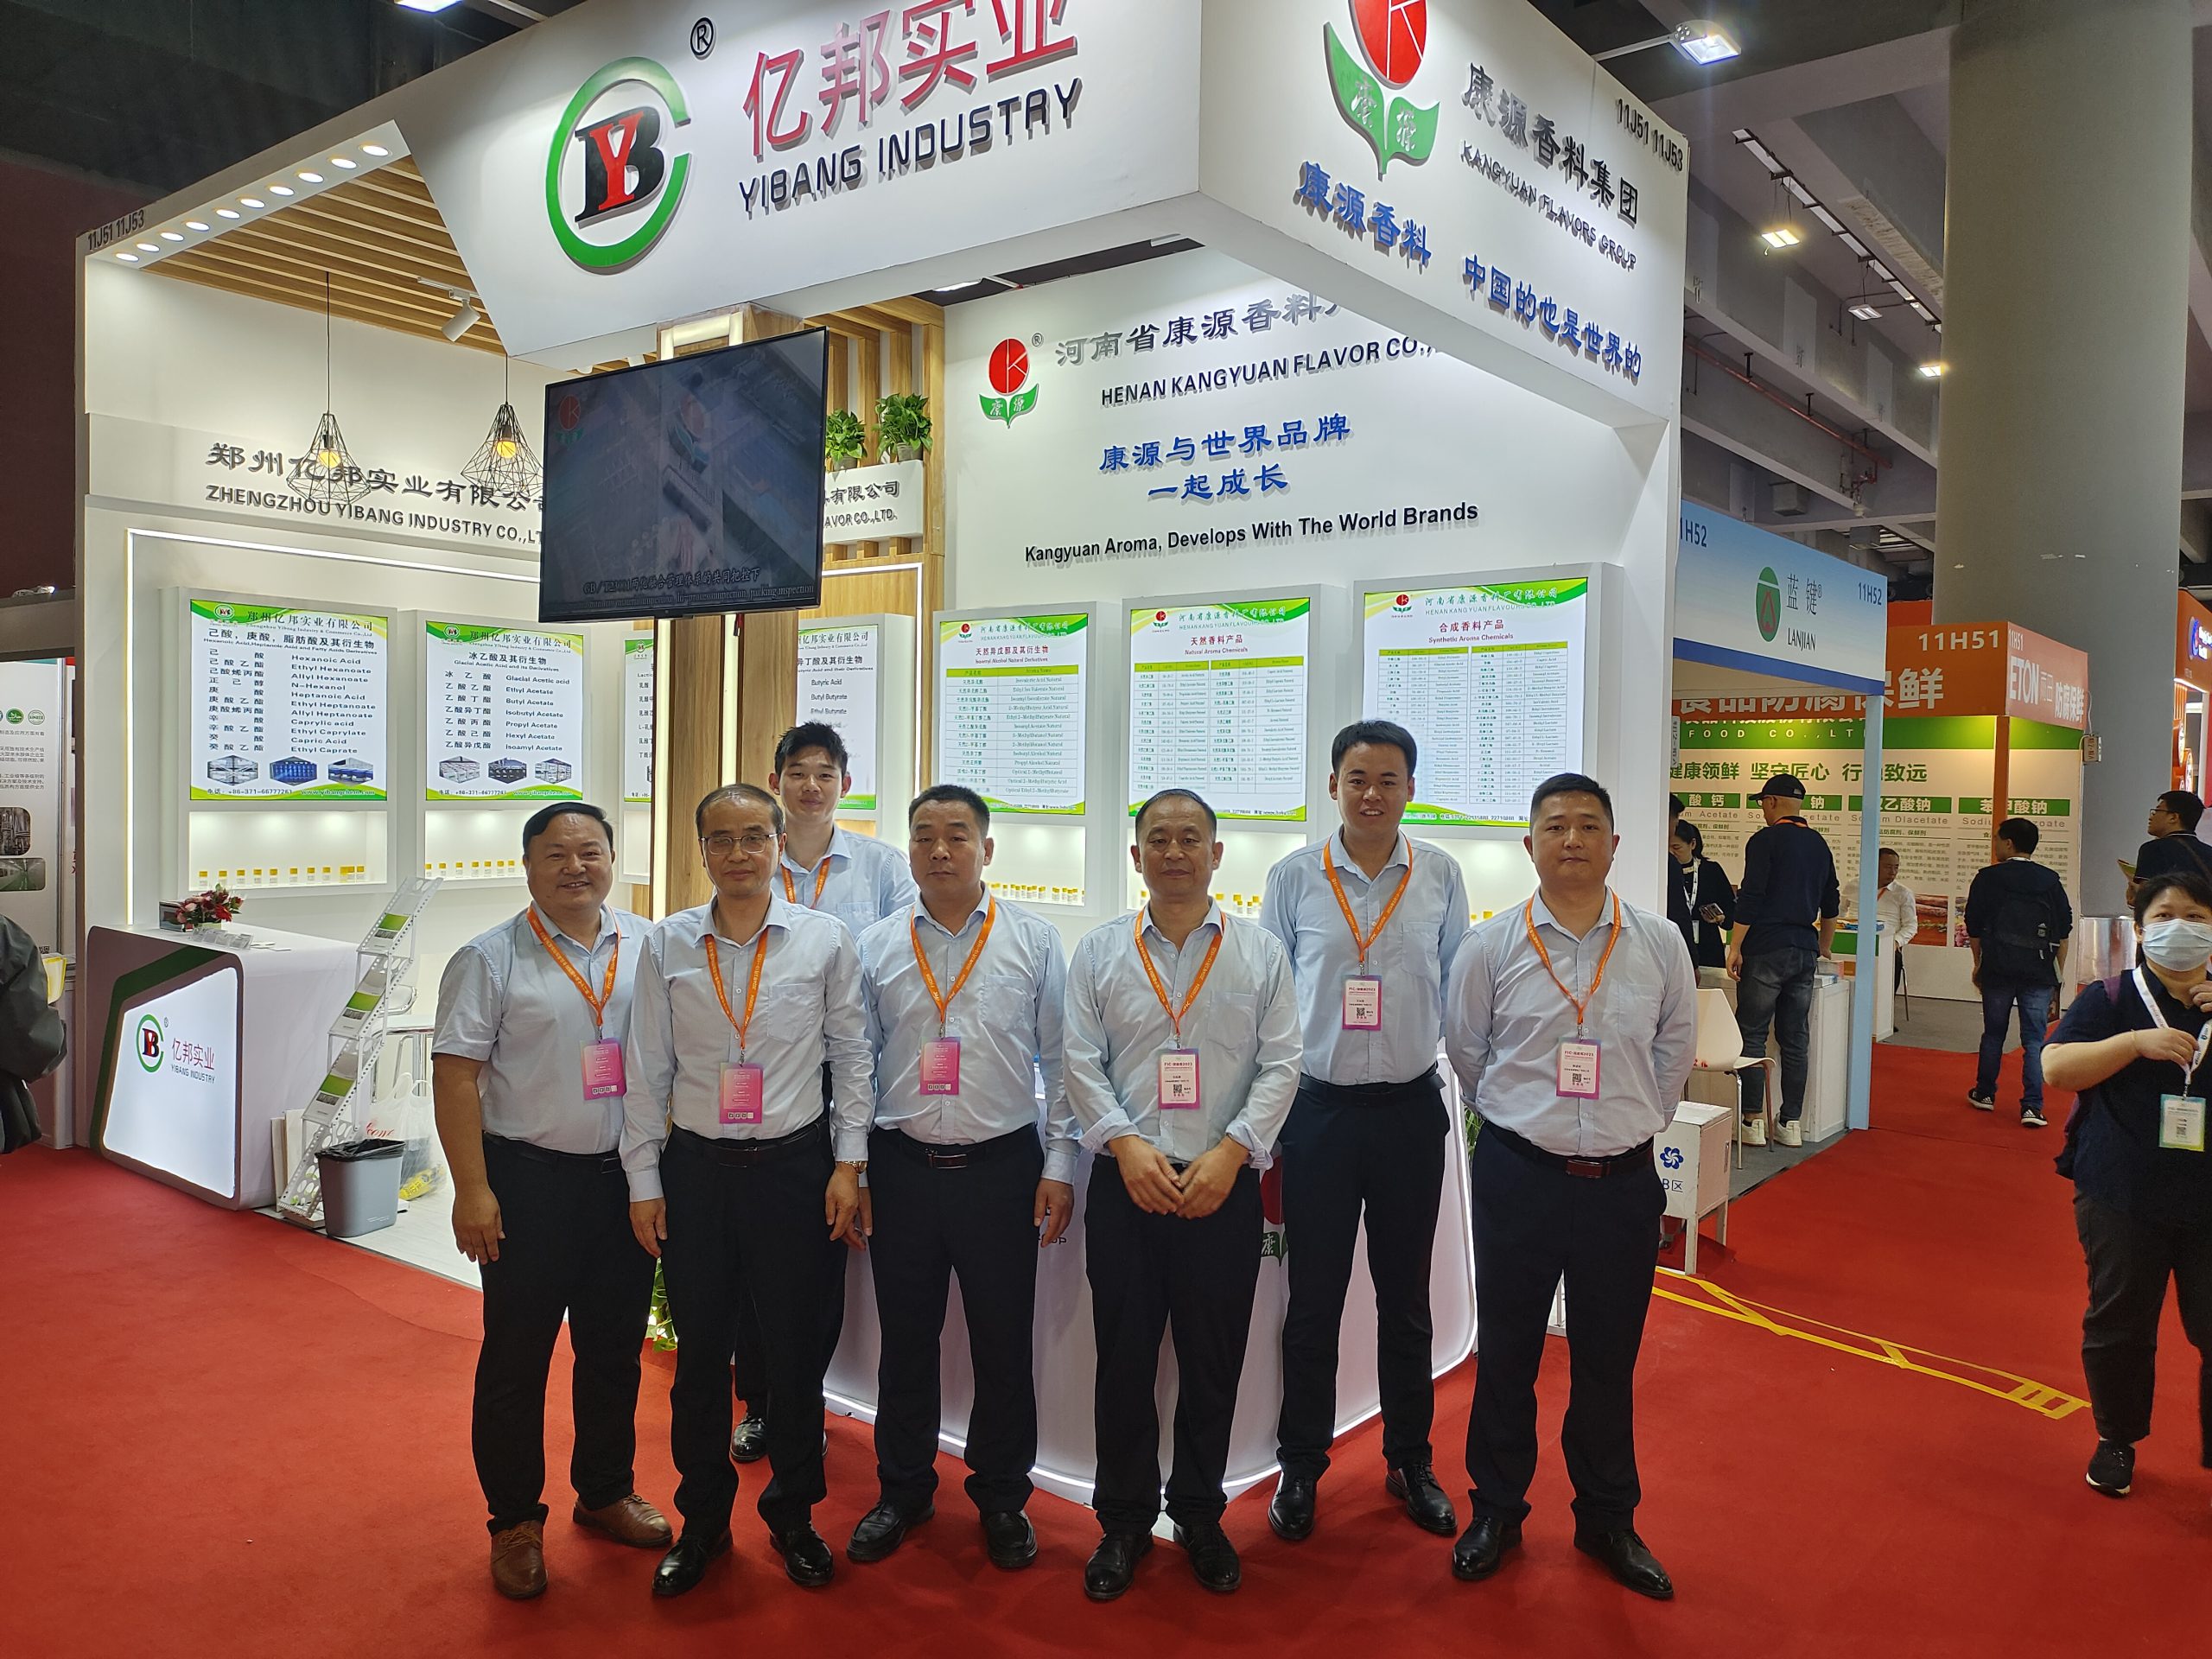 2023FIC Health Exhibition was held in Guangzhou on November 22-24